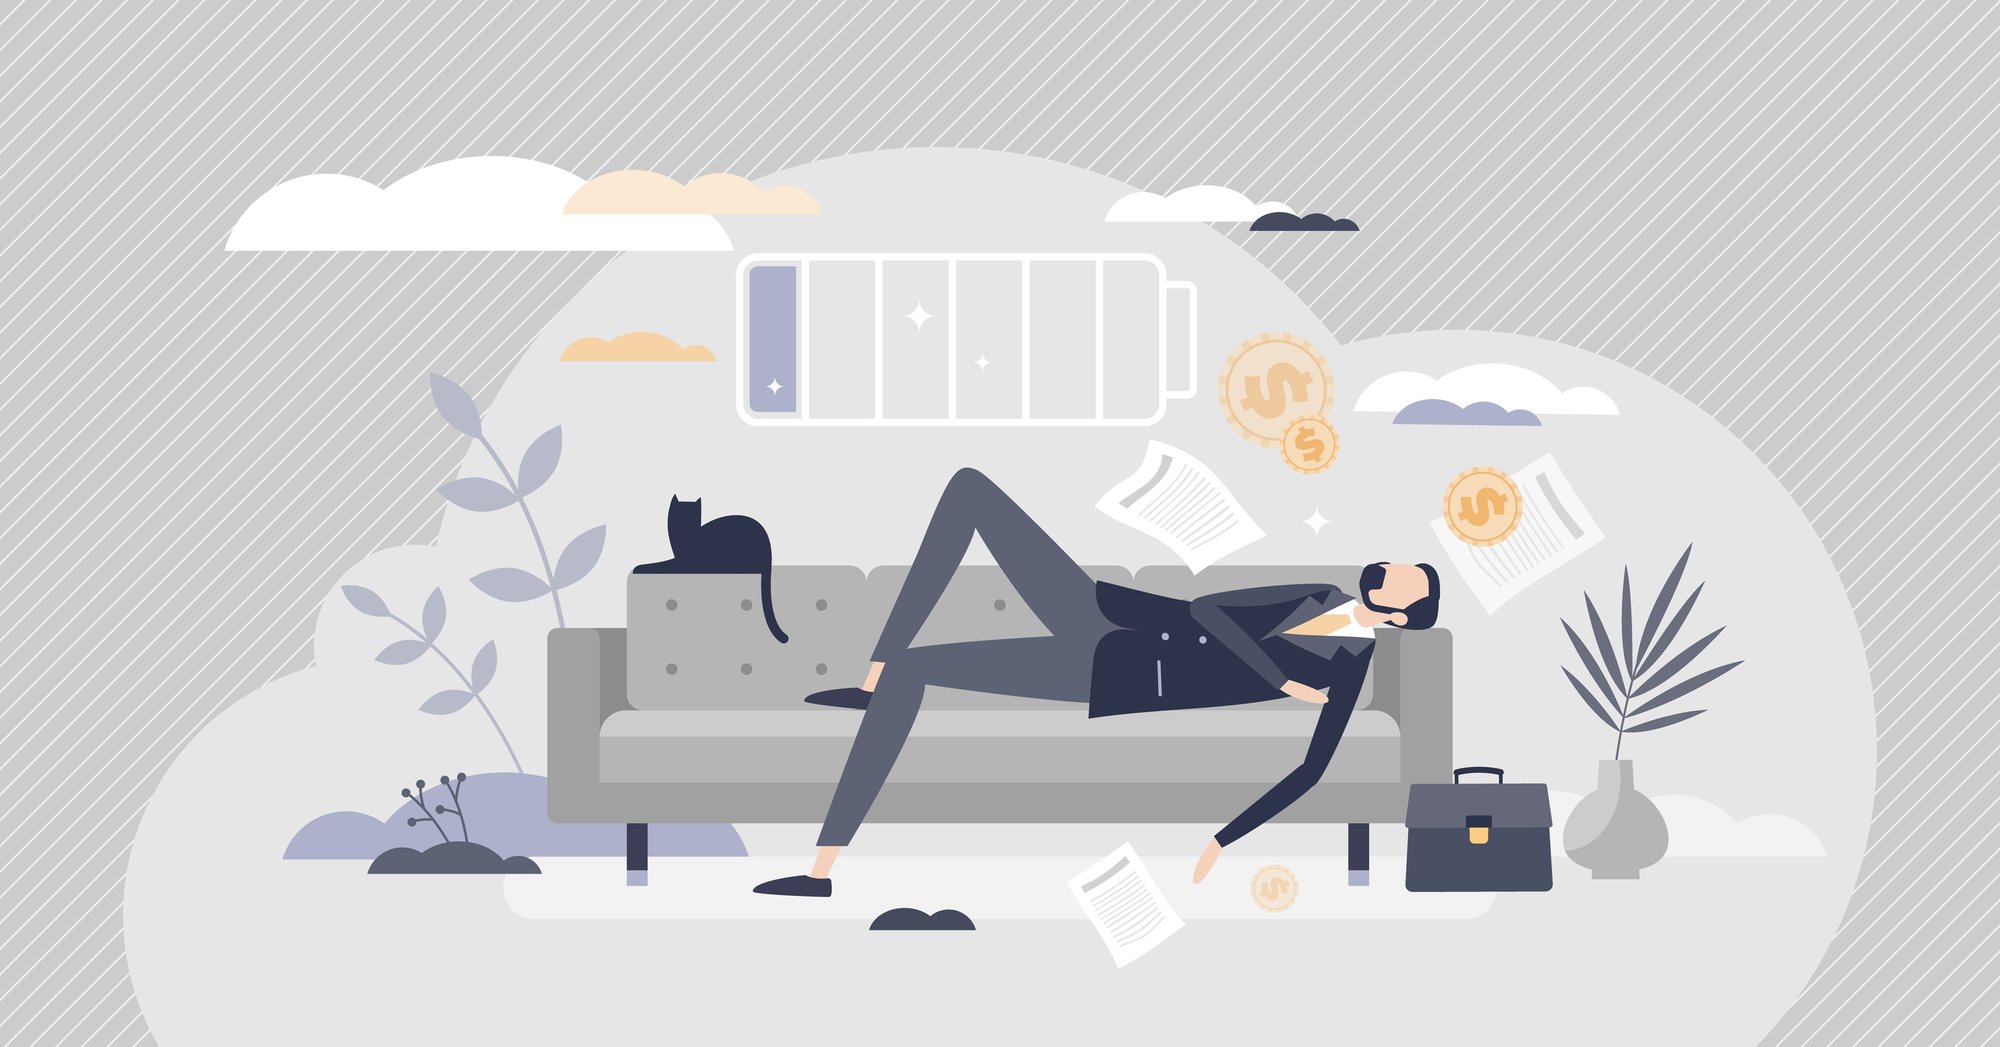 Illustration of man napping to recharge their battery